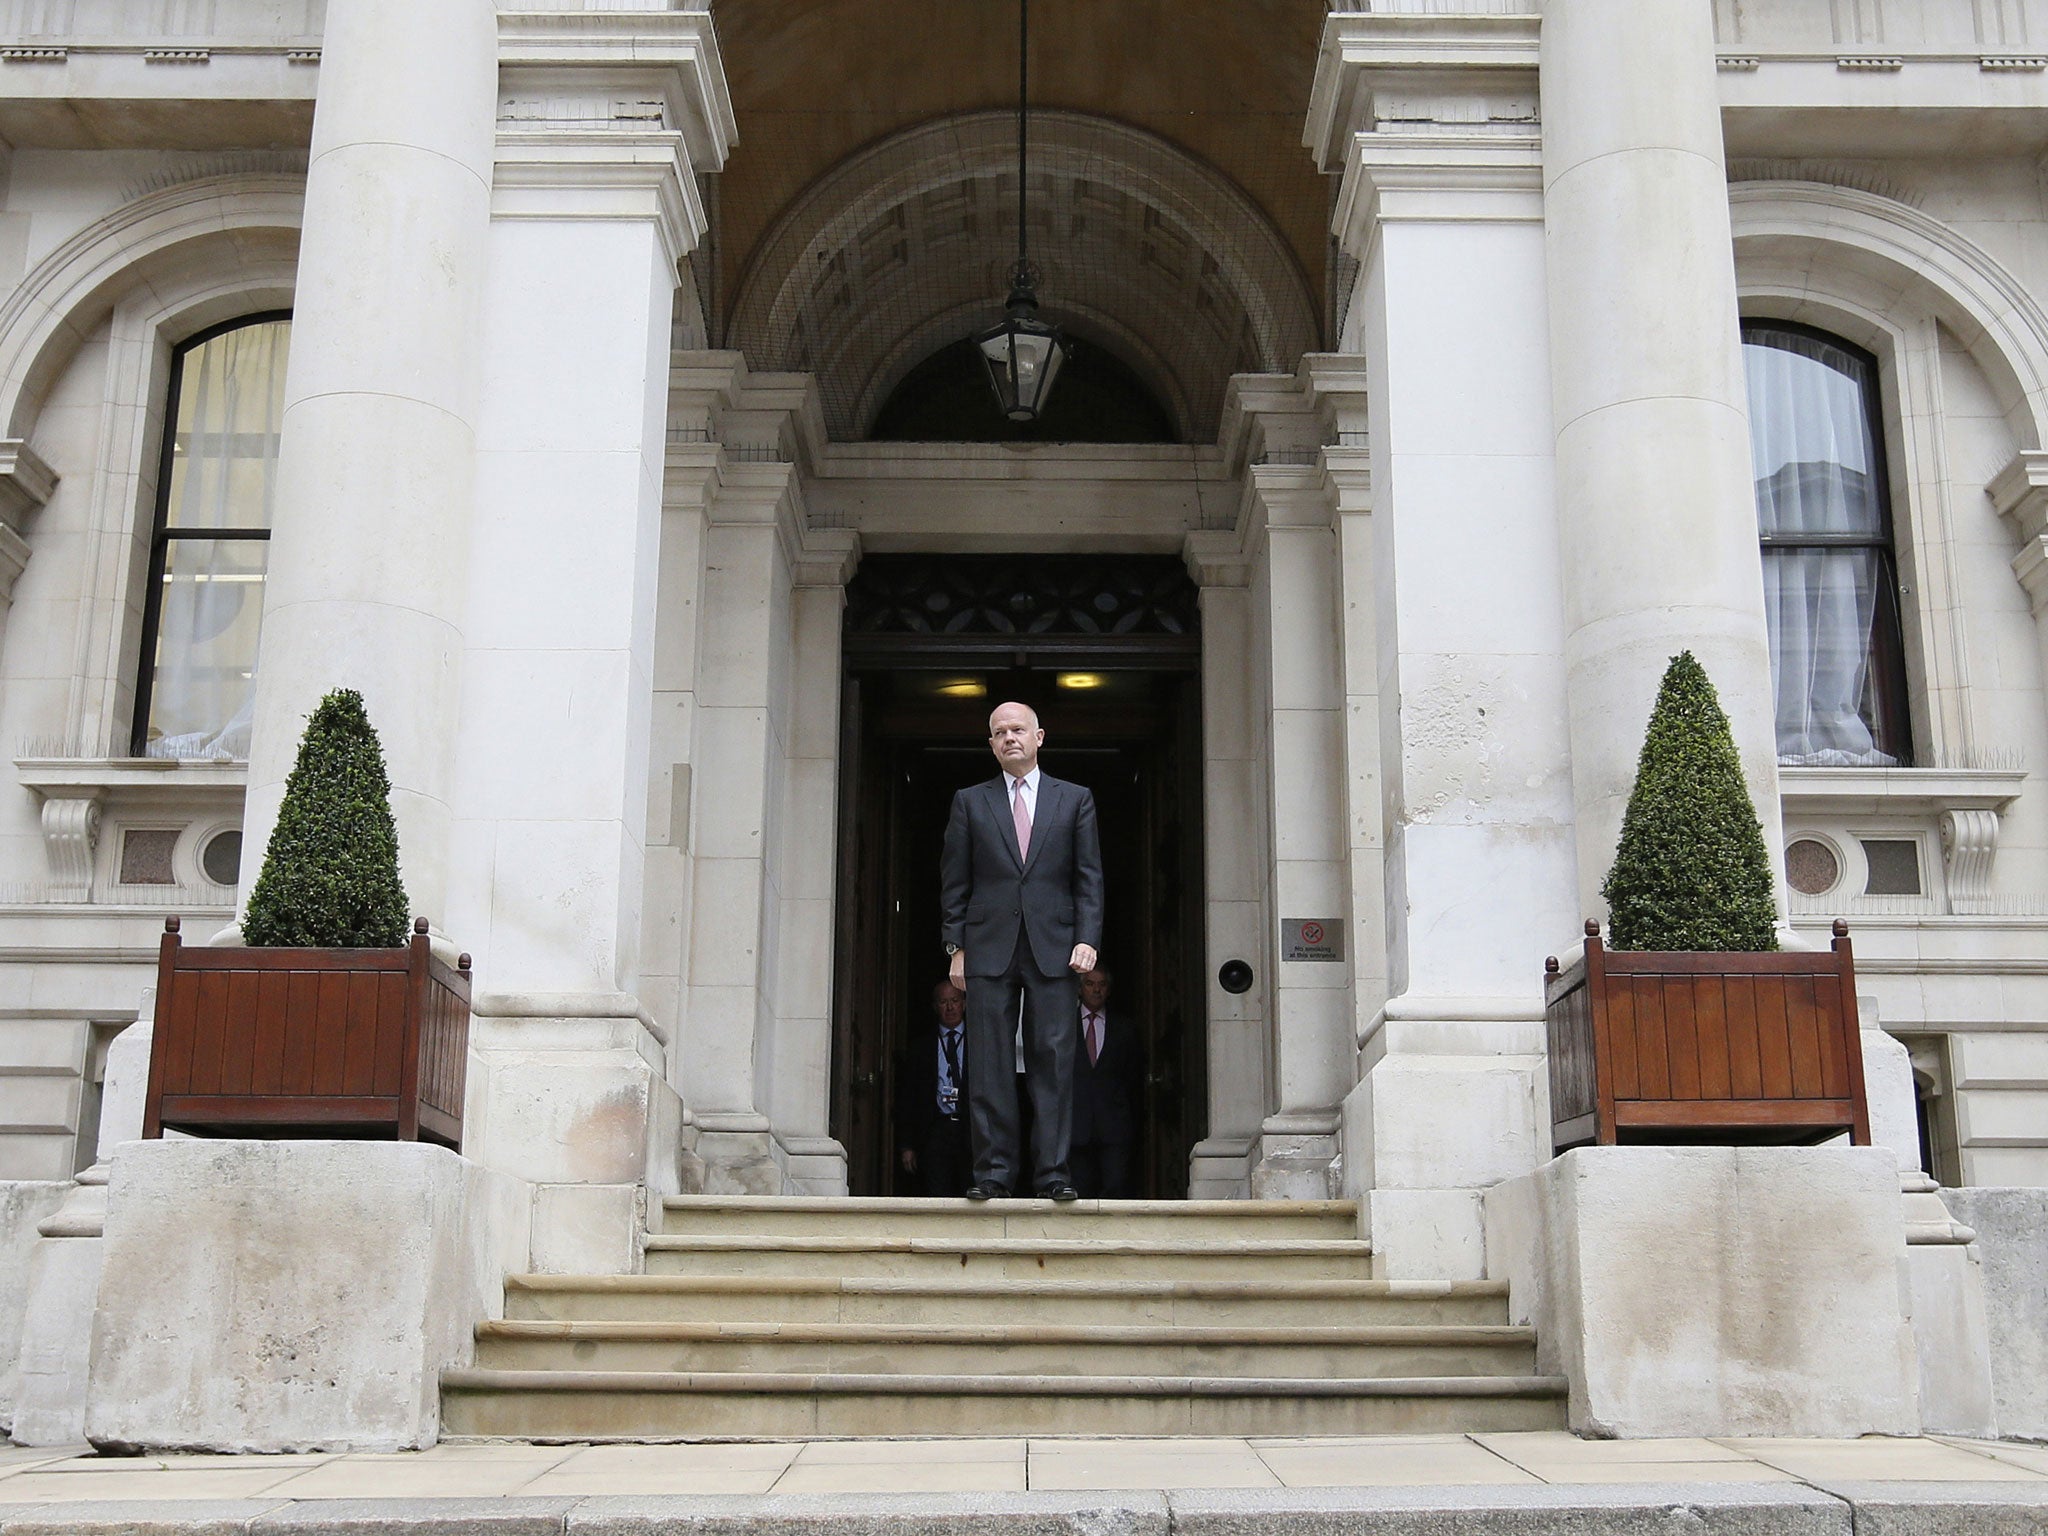 Foreign Secretary William Hague stands on the steps of the Foreign and Commonwealth Office headquarters in London